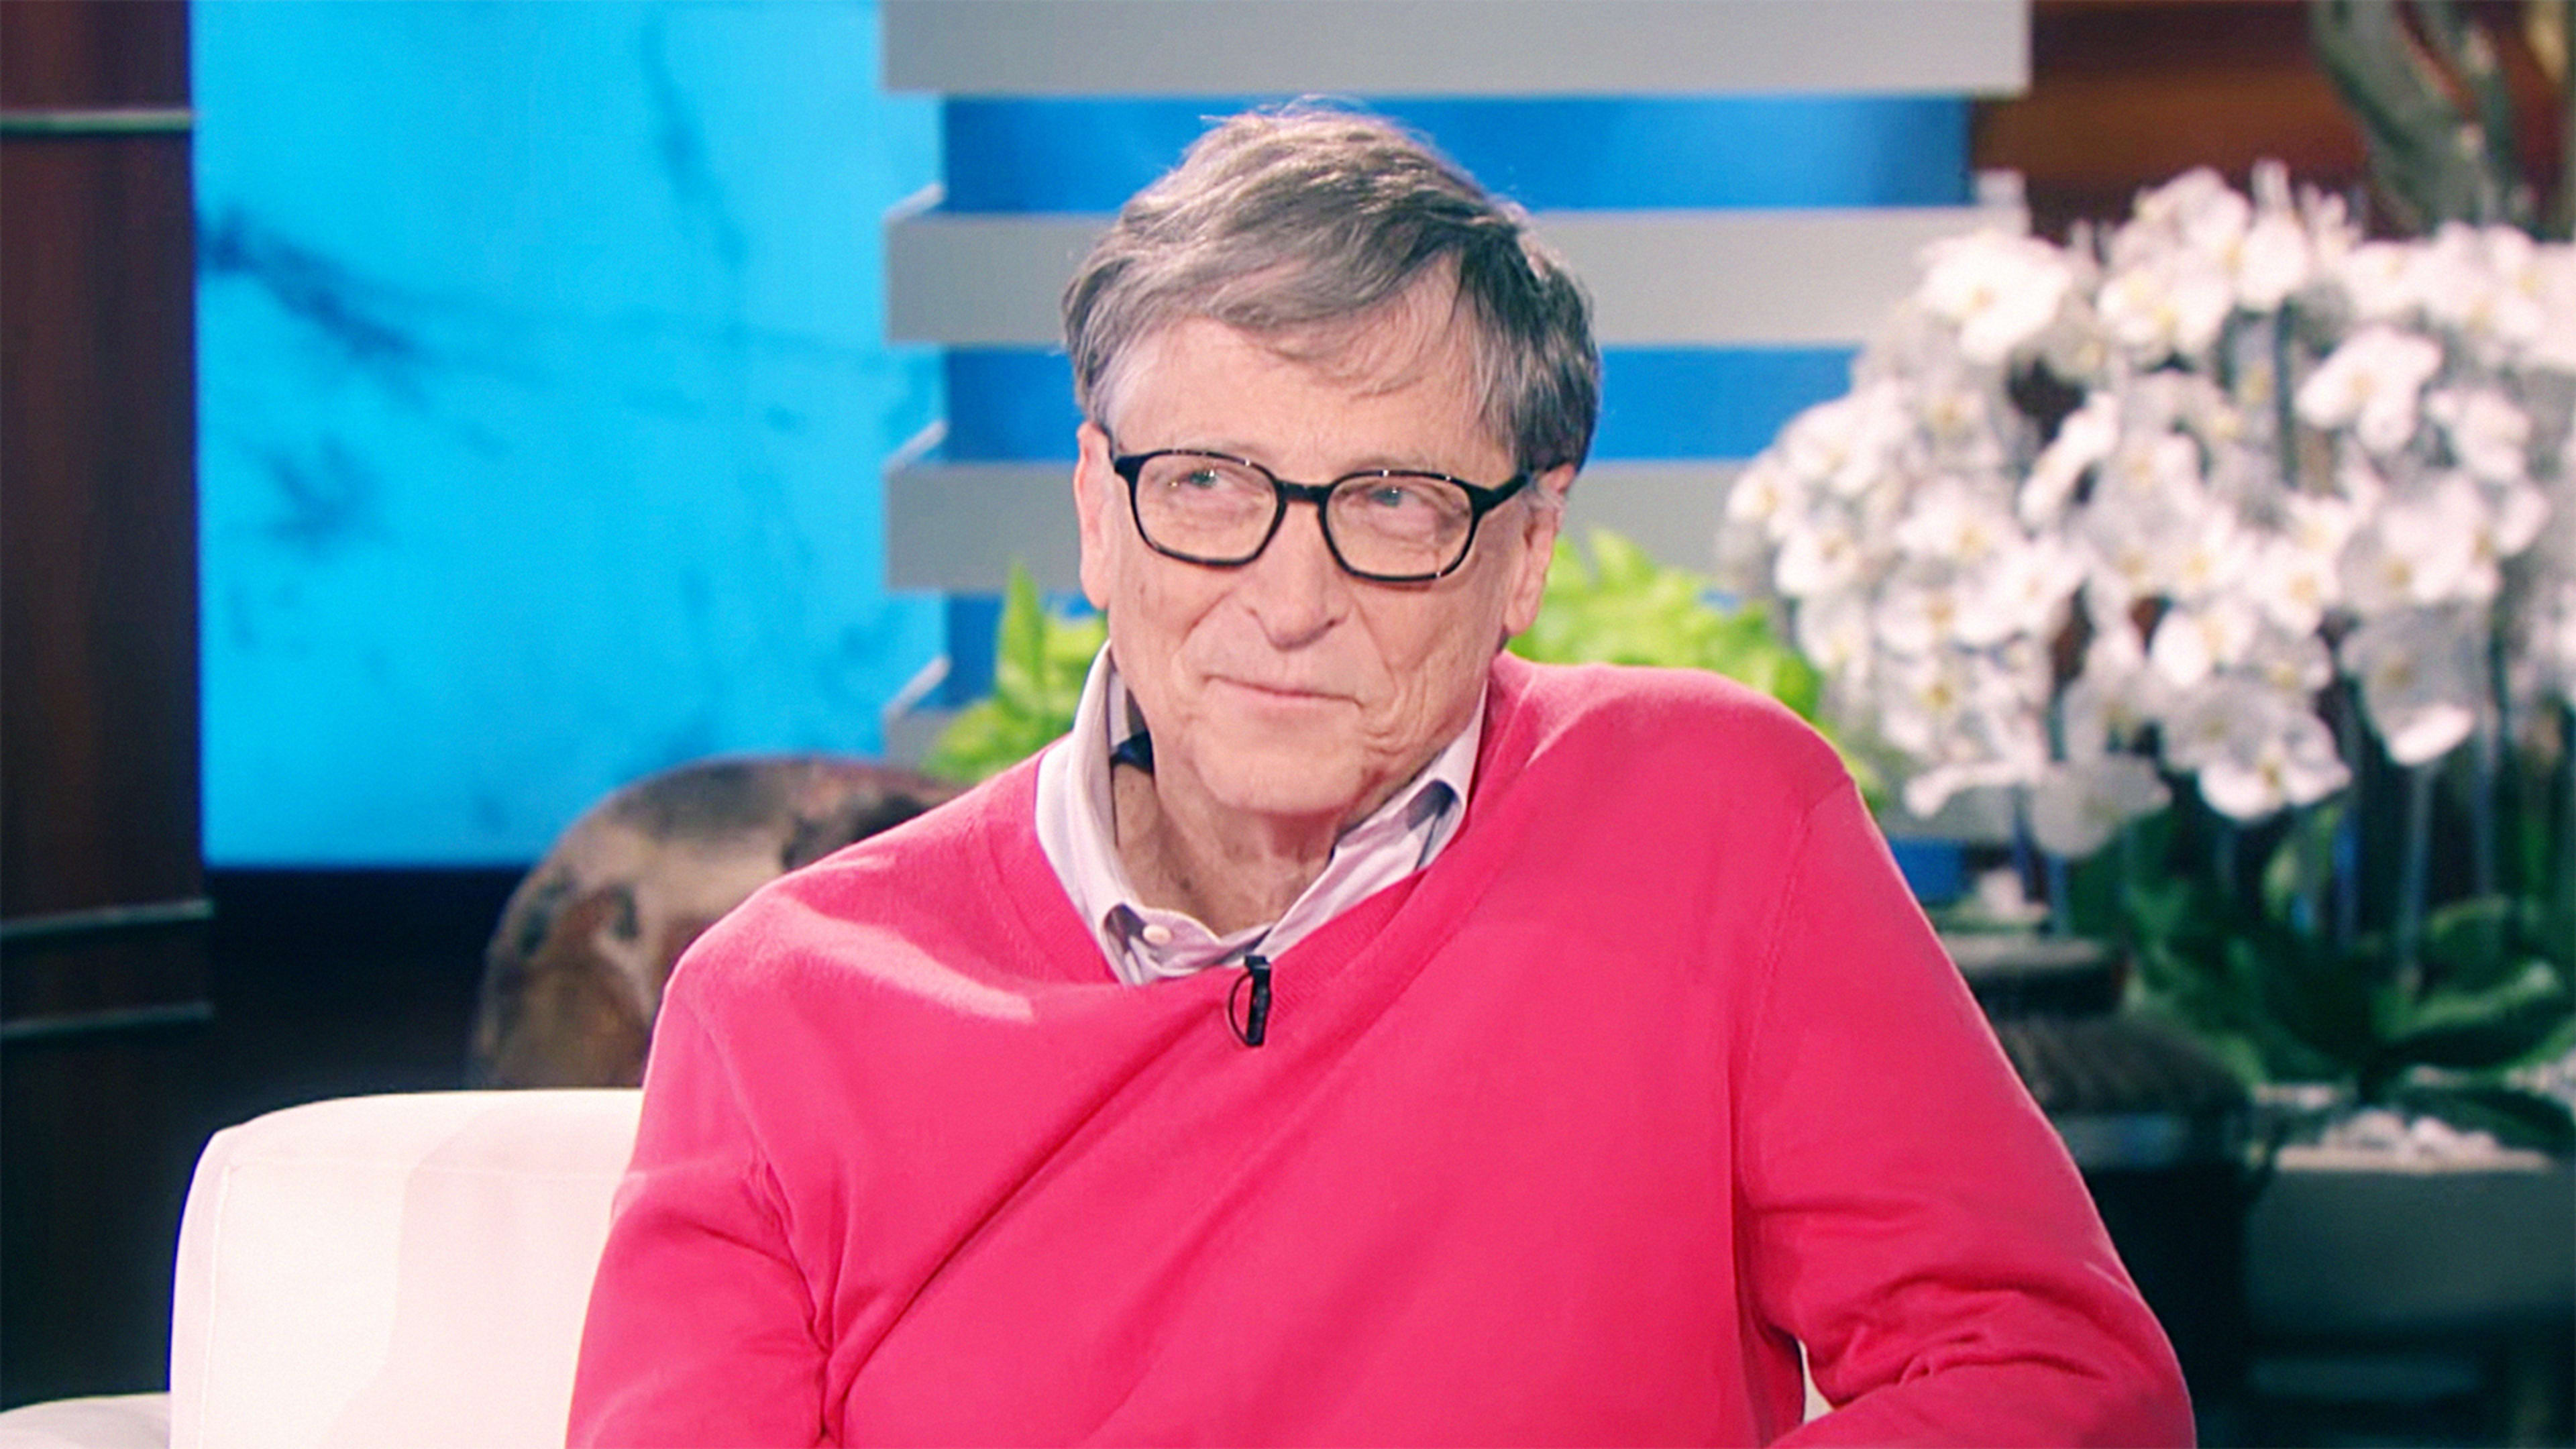 Ellen quizzed Bill Gates on the cost of groceries. He failed